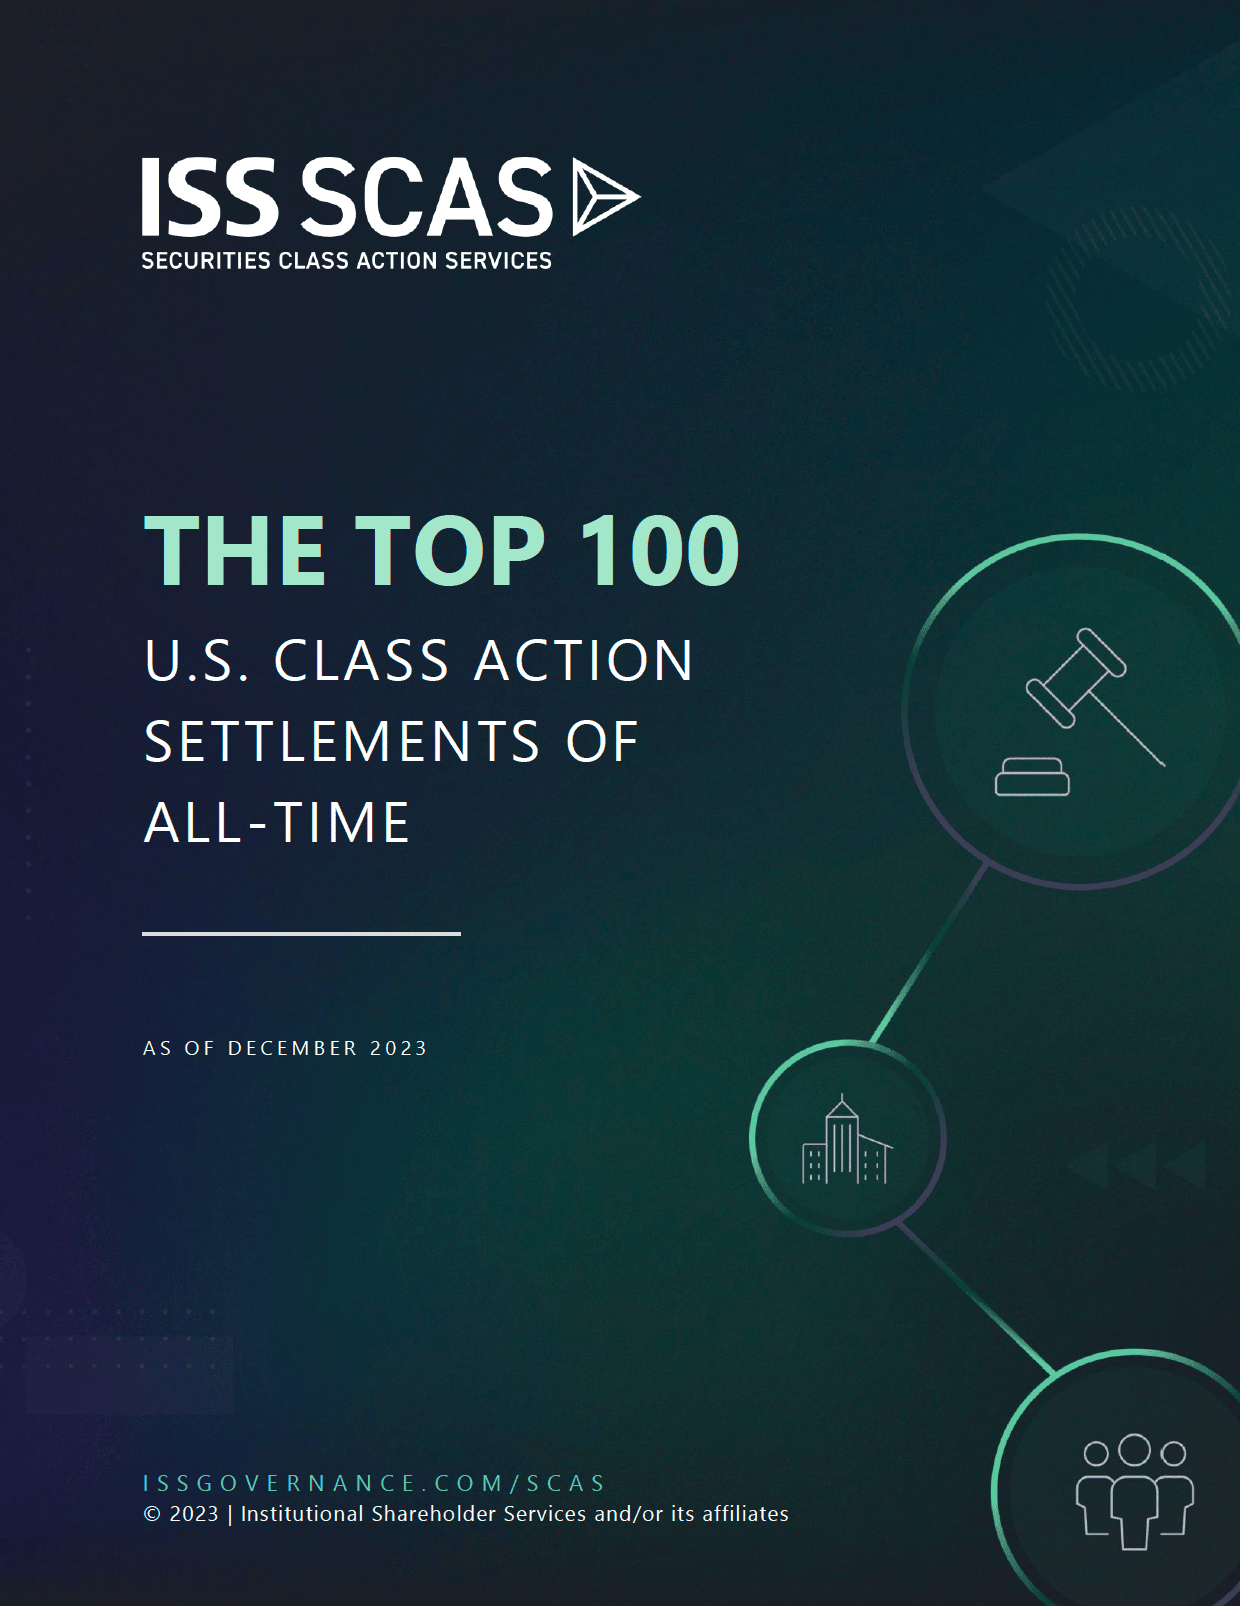 BLB&G Again Tops ISS SCAS “Top 100 Securities Class Action Settlements of All-Time” List